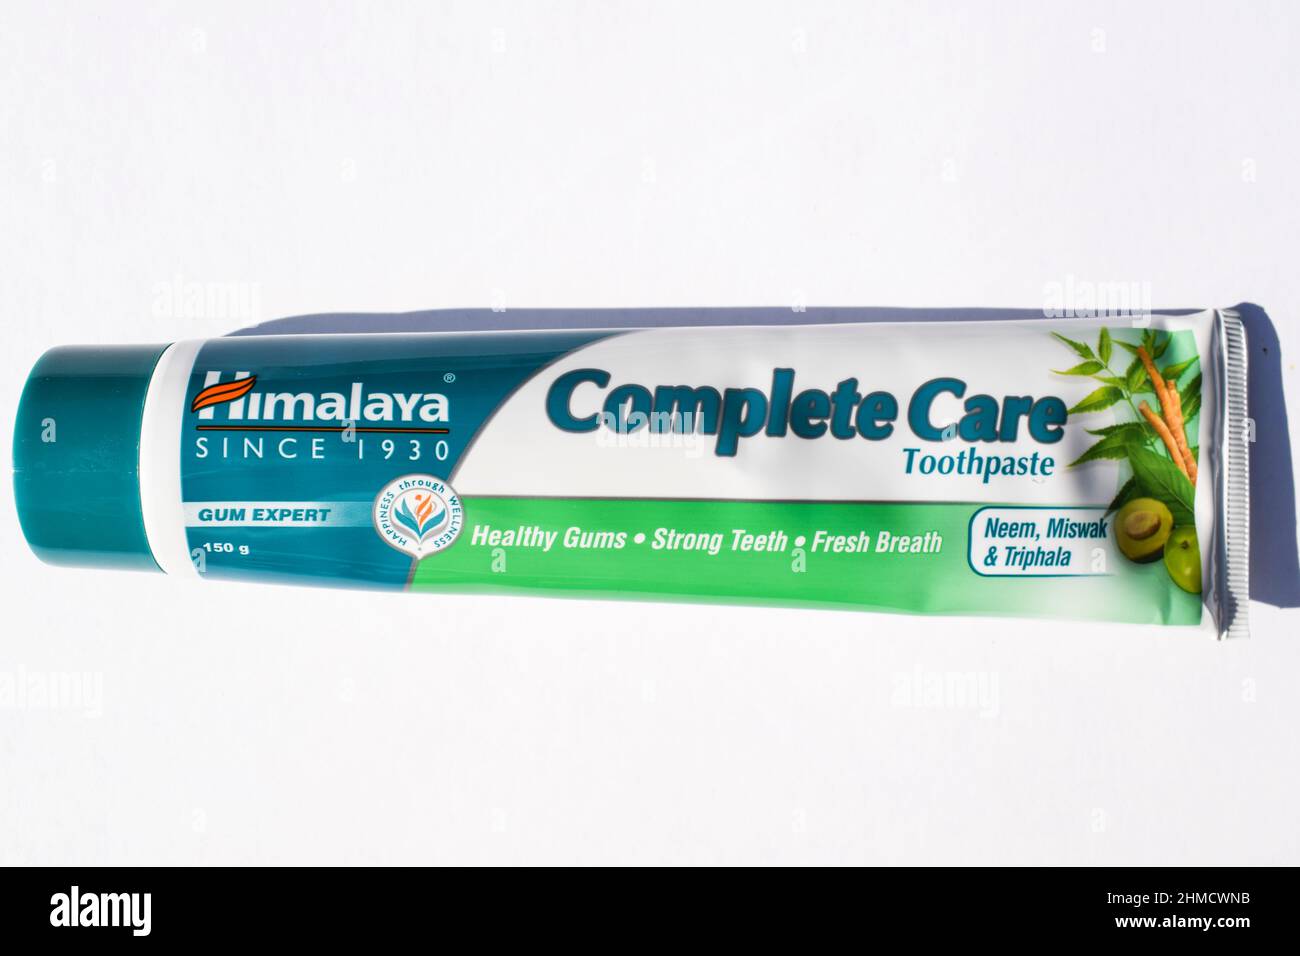 Himalaya brand Complete care herbal tooth paste. With Neem, miswak triphala herbs. Indian brand toothpaste tube on white background Stock Photo